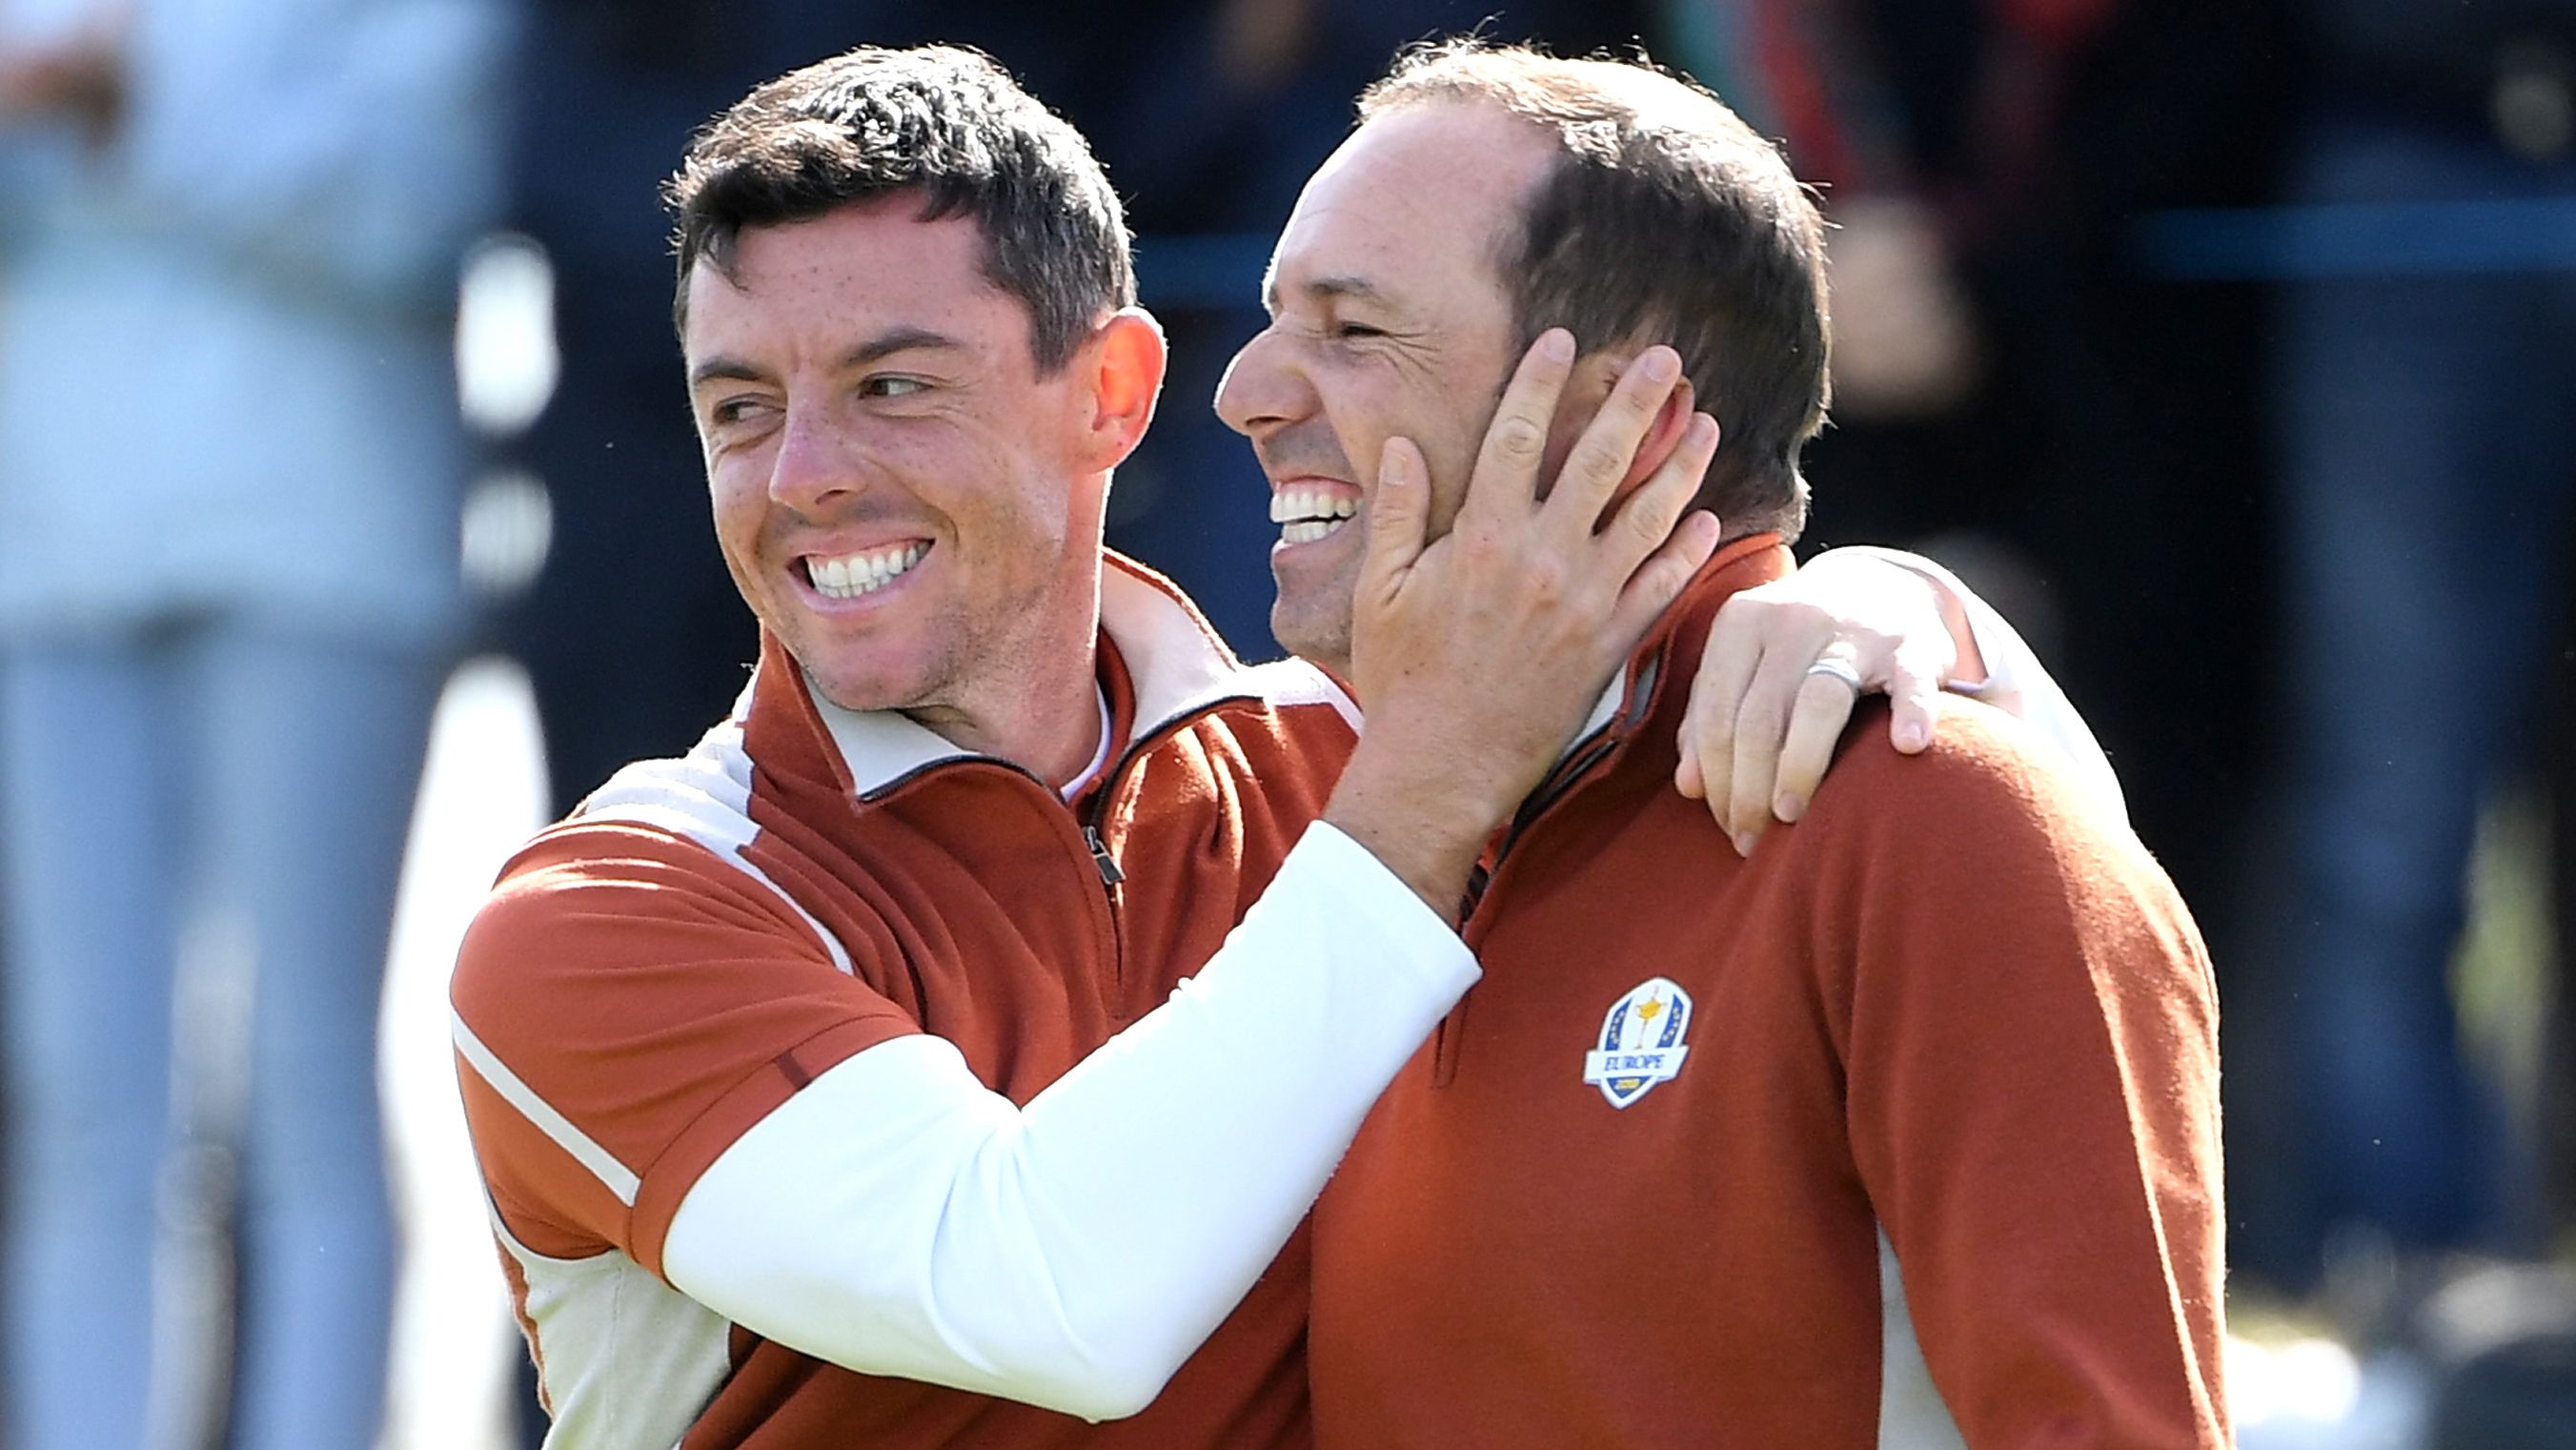 Rory McIlroy and Sergio Garcia of Europe celebrate victory during the morning fourball matches of the 2018 Ryder Cup at Le Golf National on September 29, 2018 in Paris, France. (Photo by Ross Kinnaird/Getty Images)